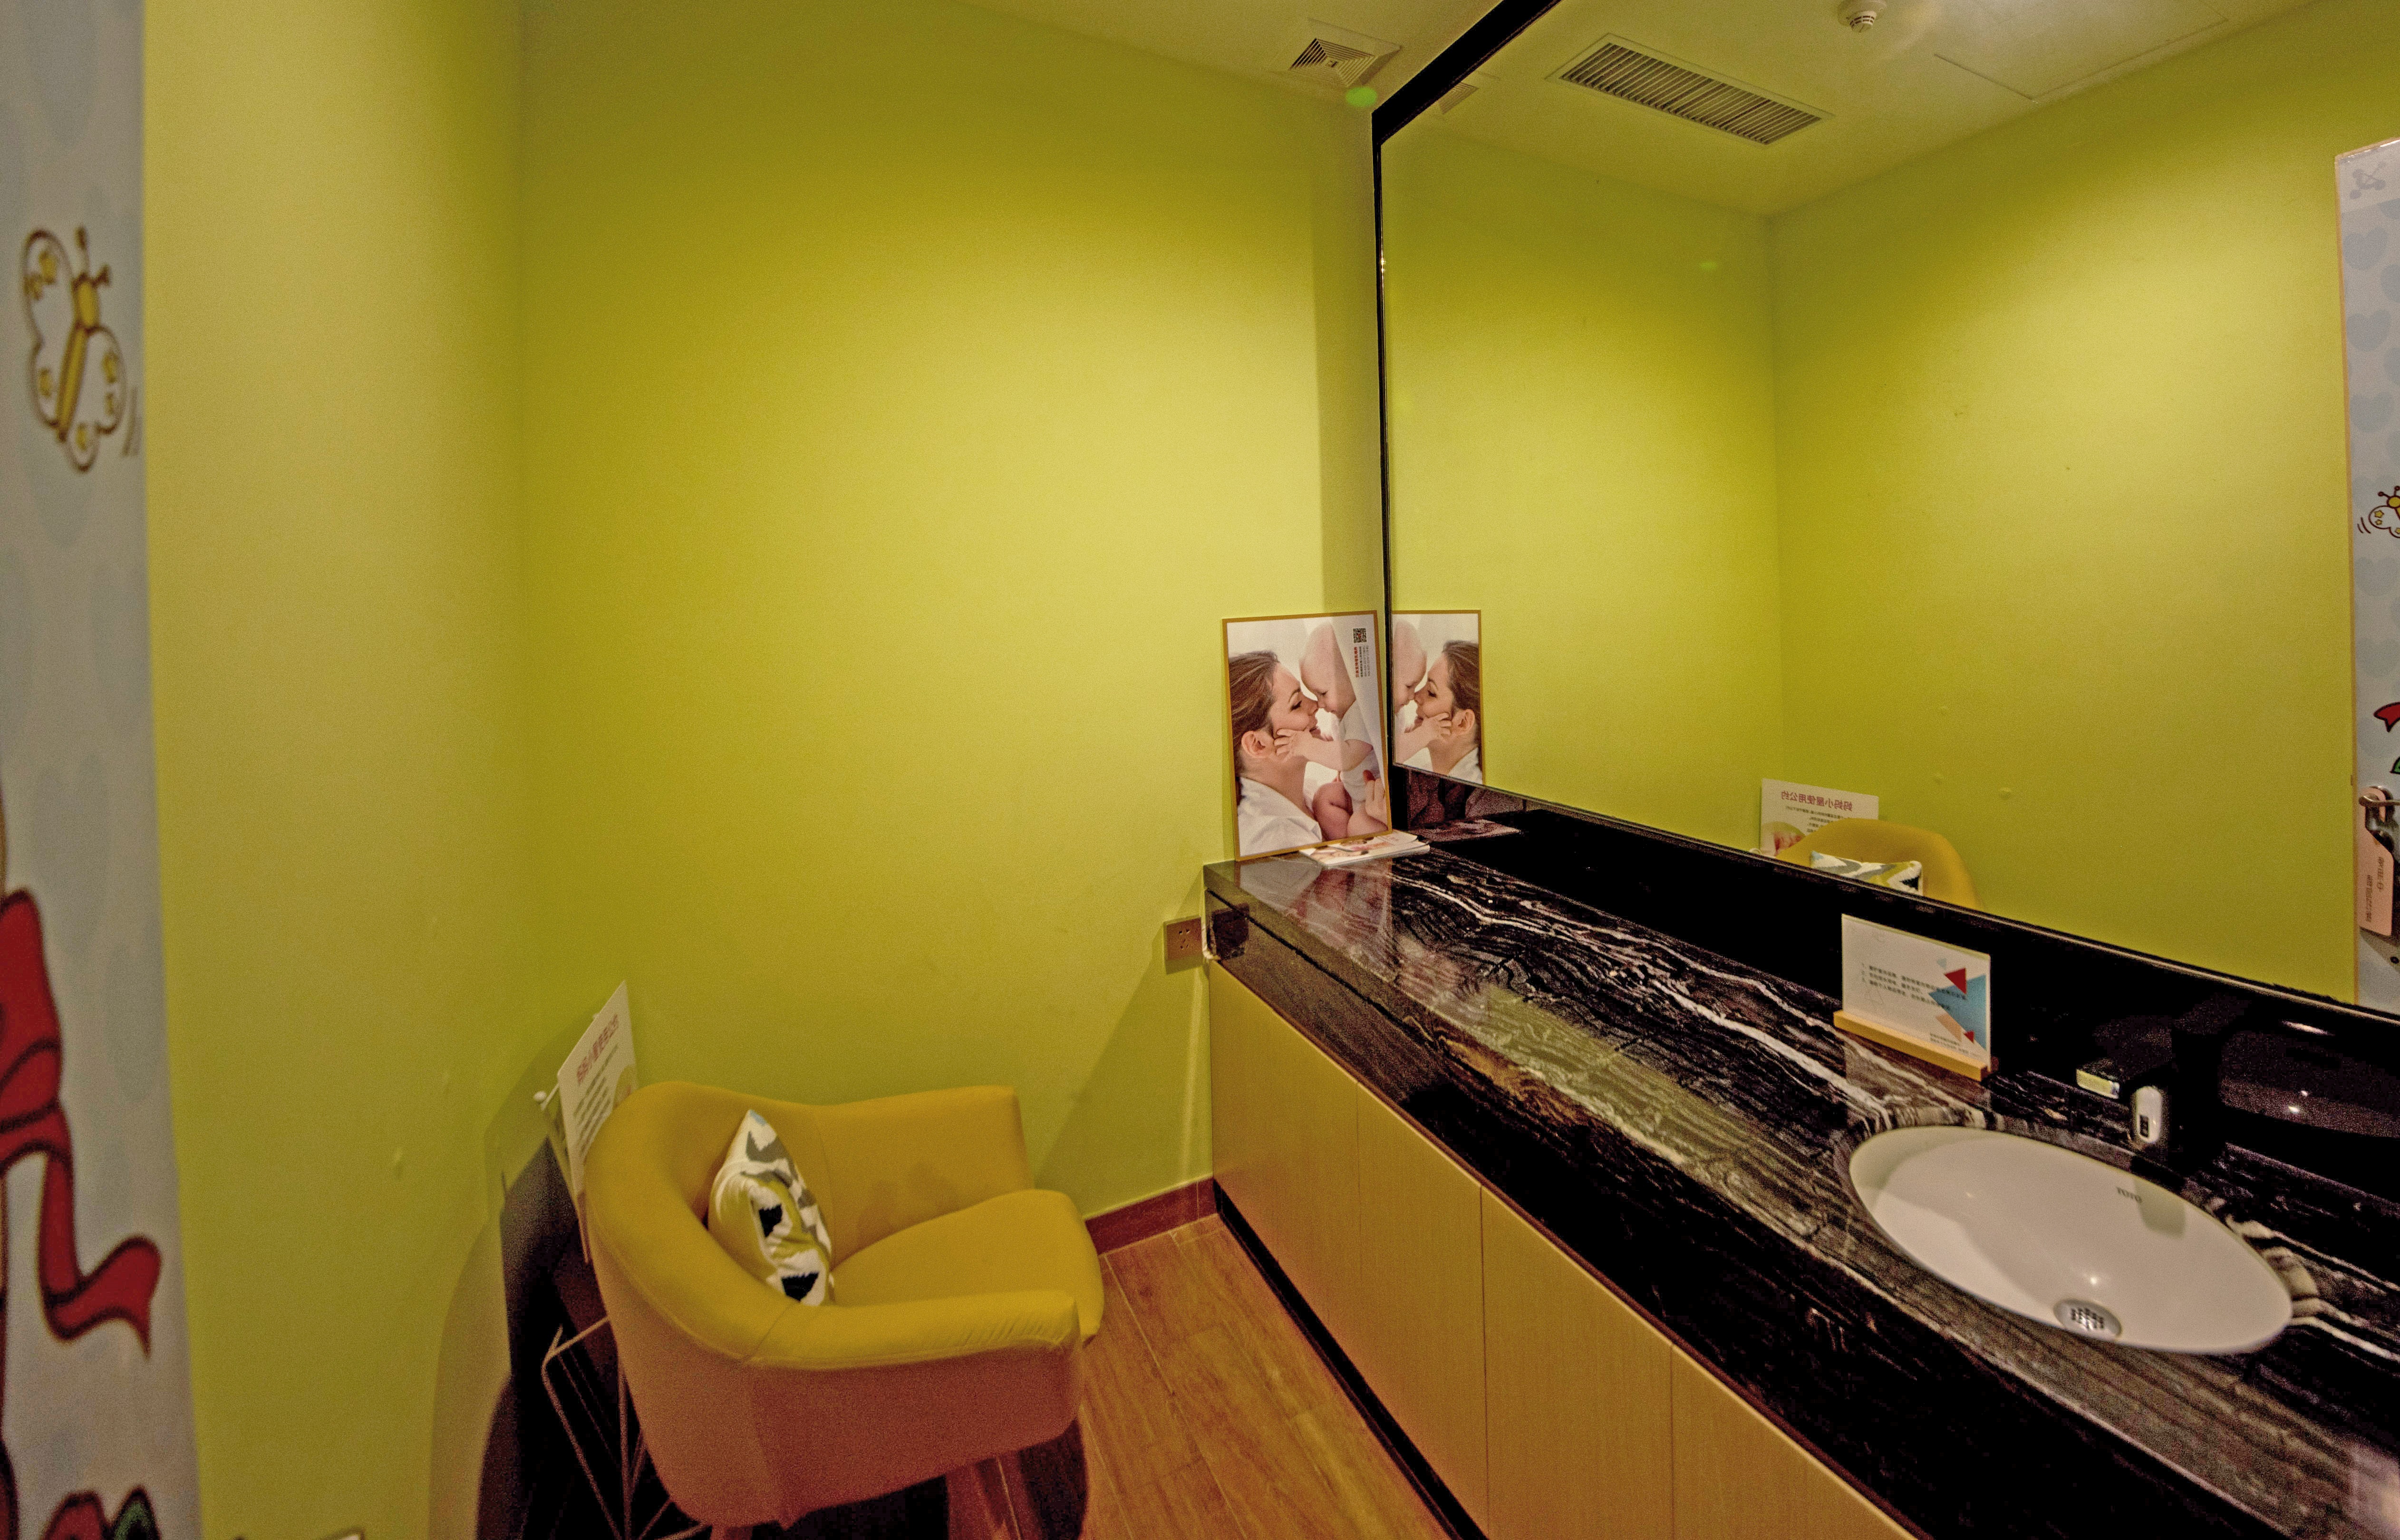 We provide breastfeeding room in our office space to foster a mother-friendly environment.